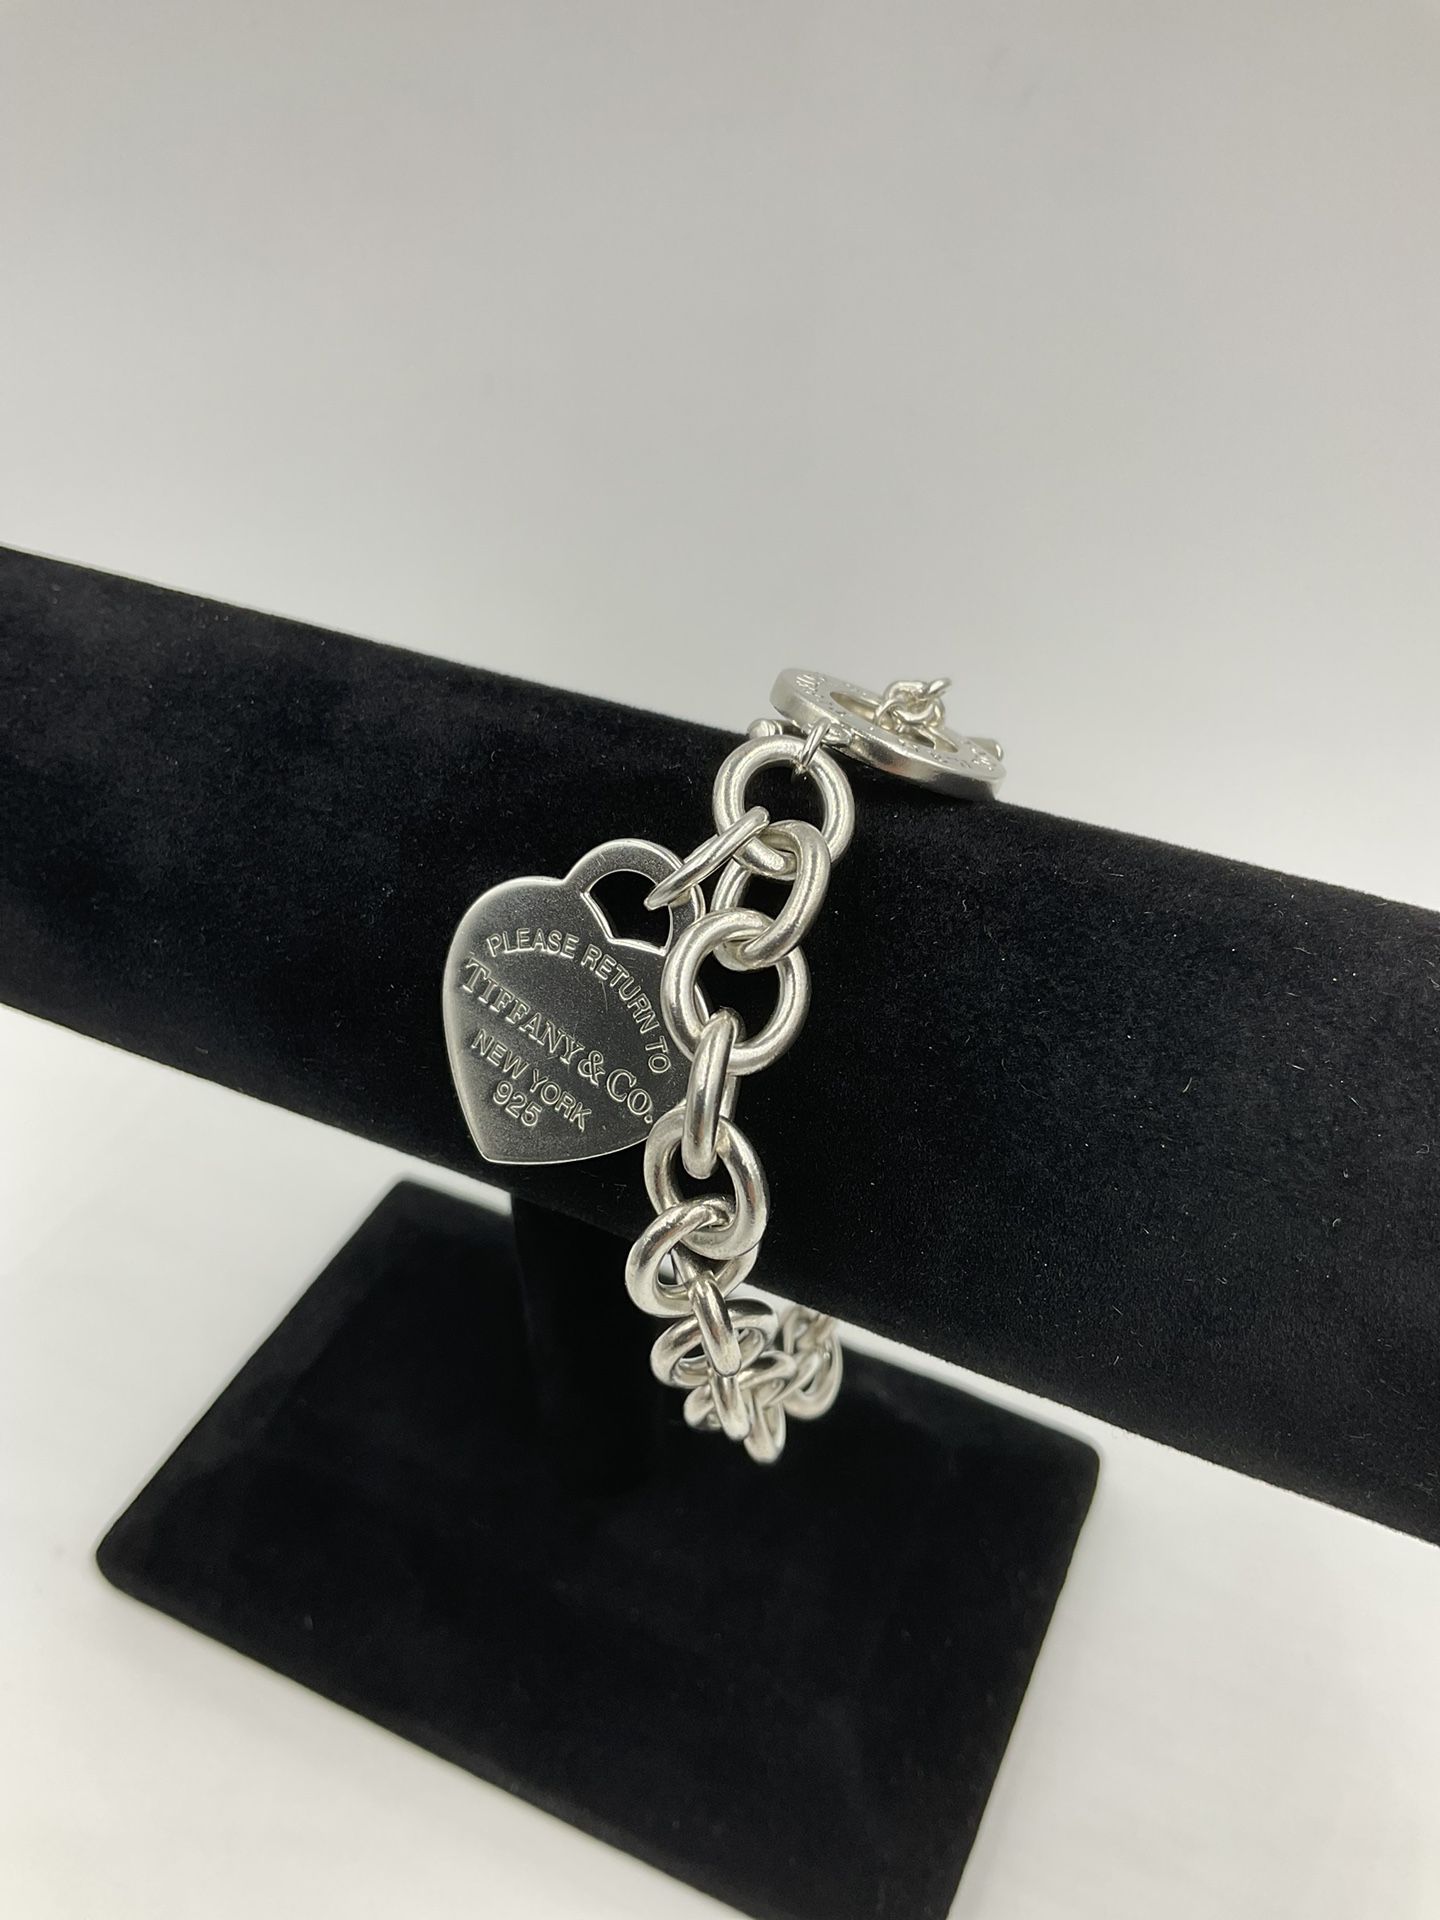 TIFFANY AND CO. SILVER HEART TAG TOGGLE BRACELET 32.1GR 7.5”